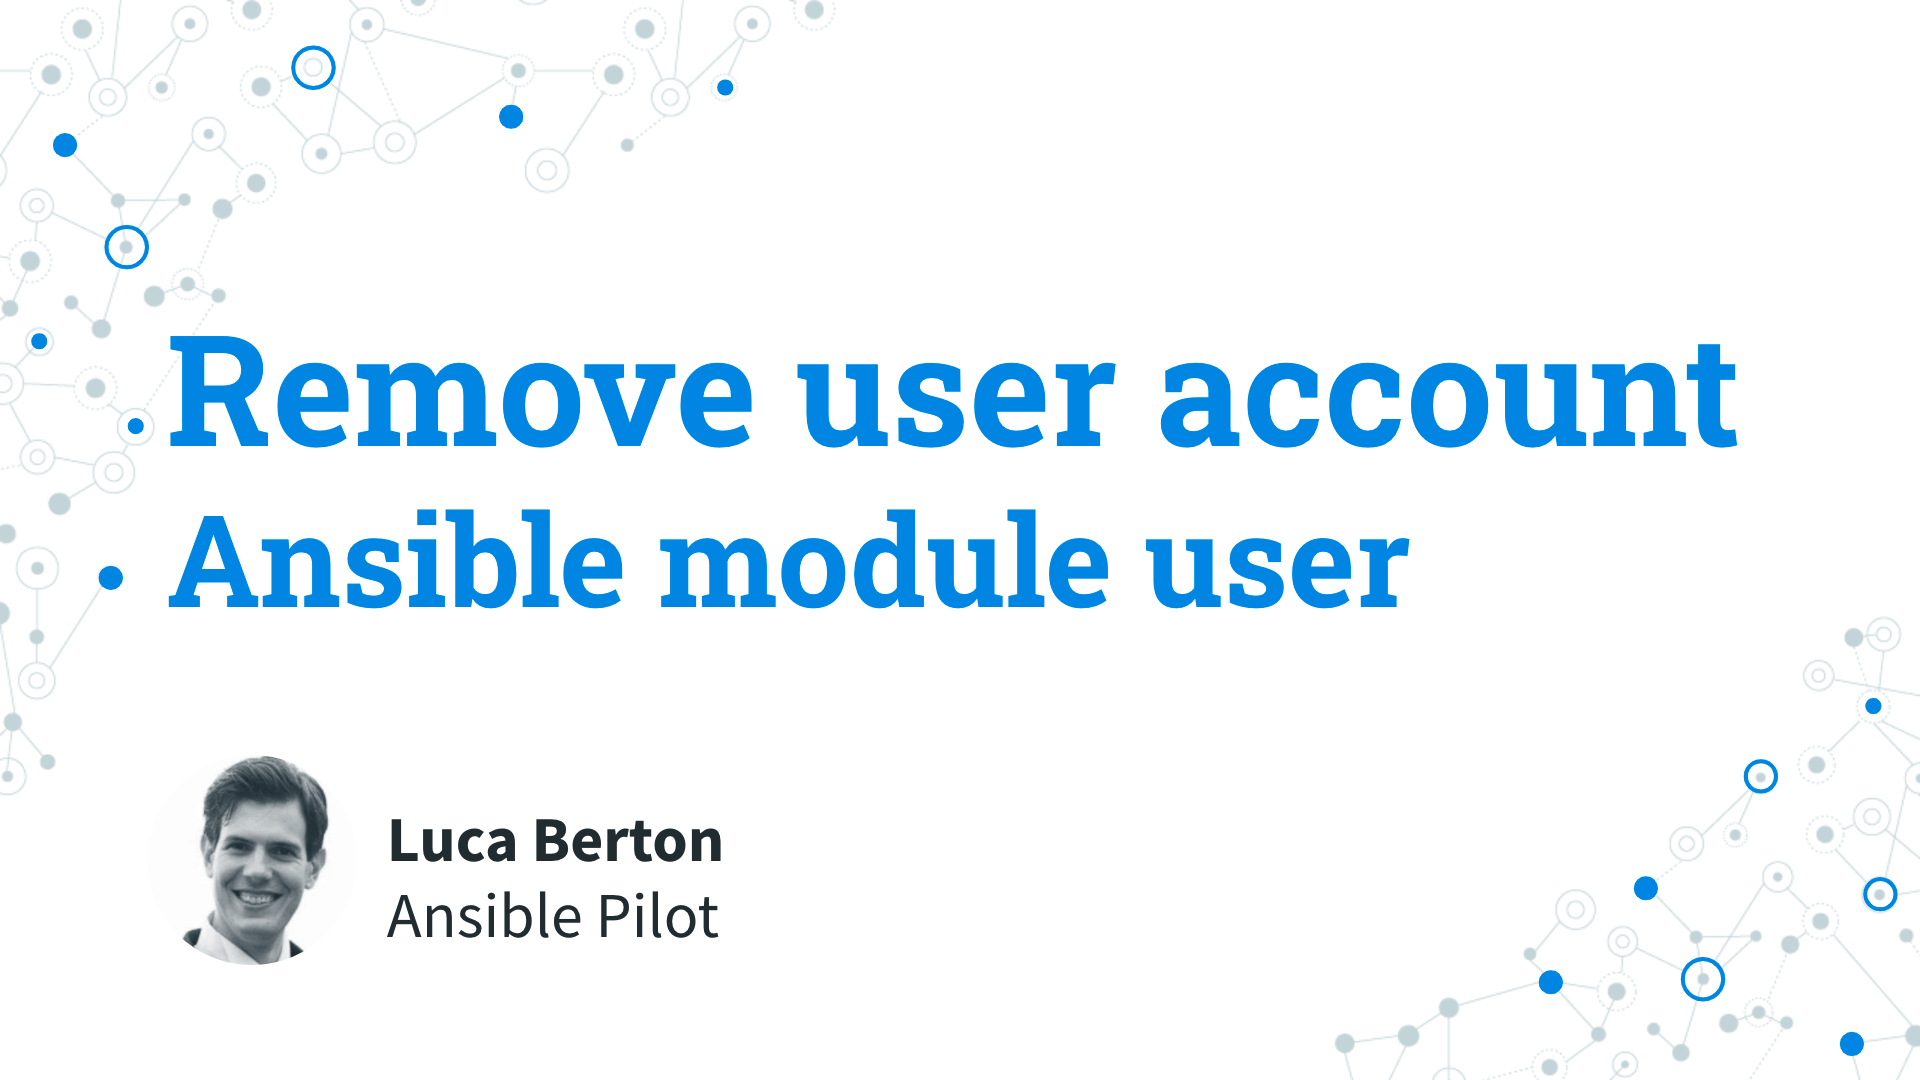 Remove user account - Ansible module user